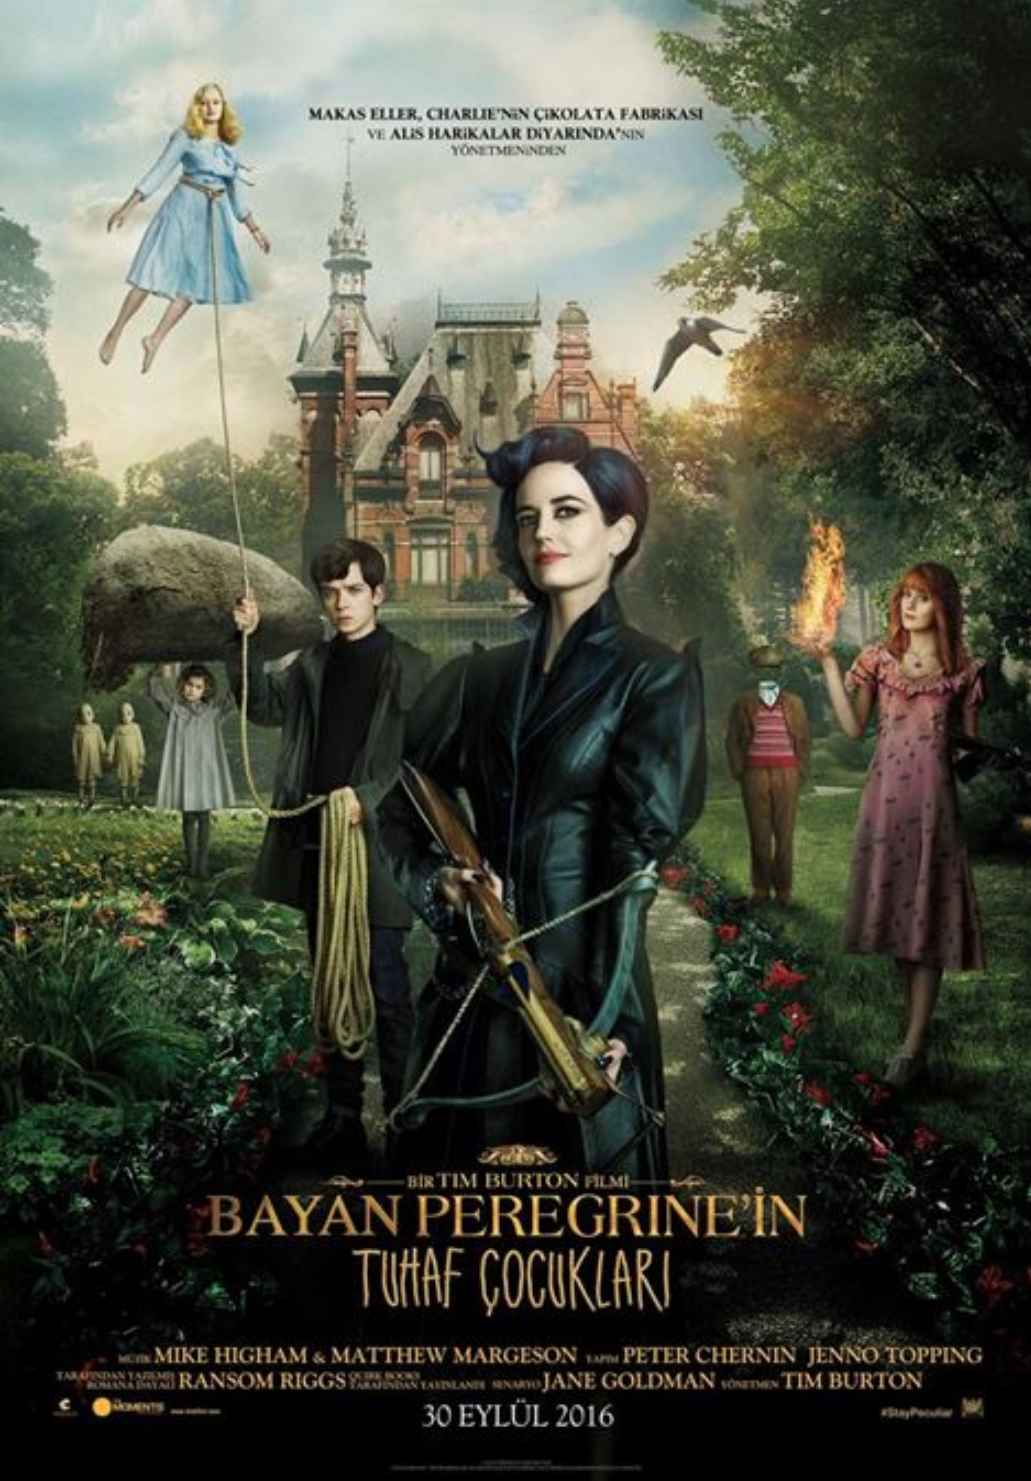 movie similar to Harry Potter Miss Peregrine’s Home for Peculiar Children (2016)